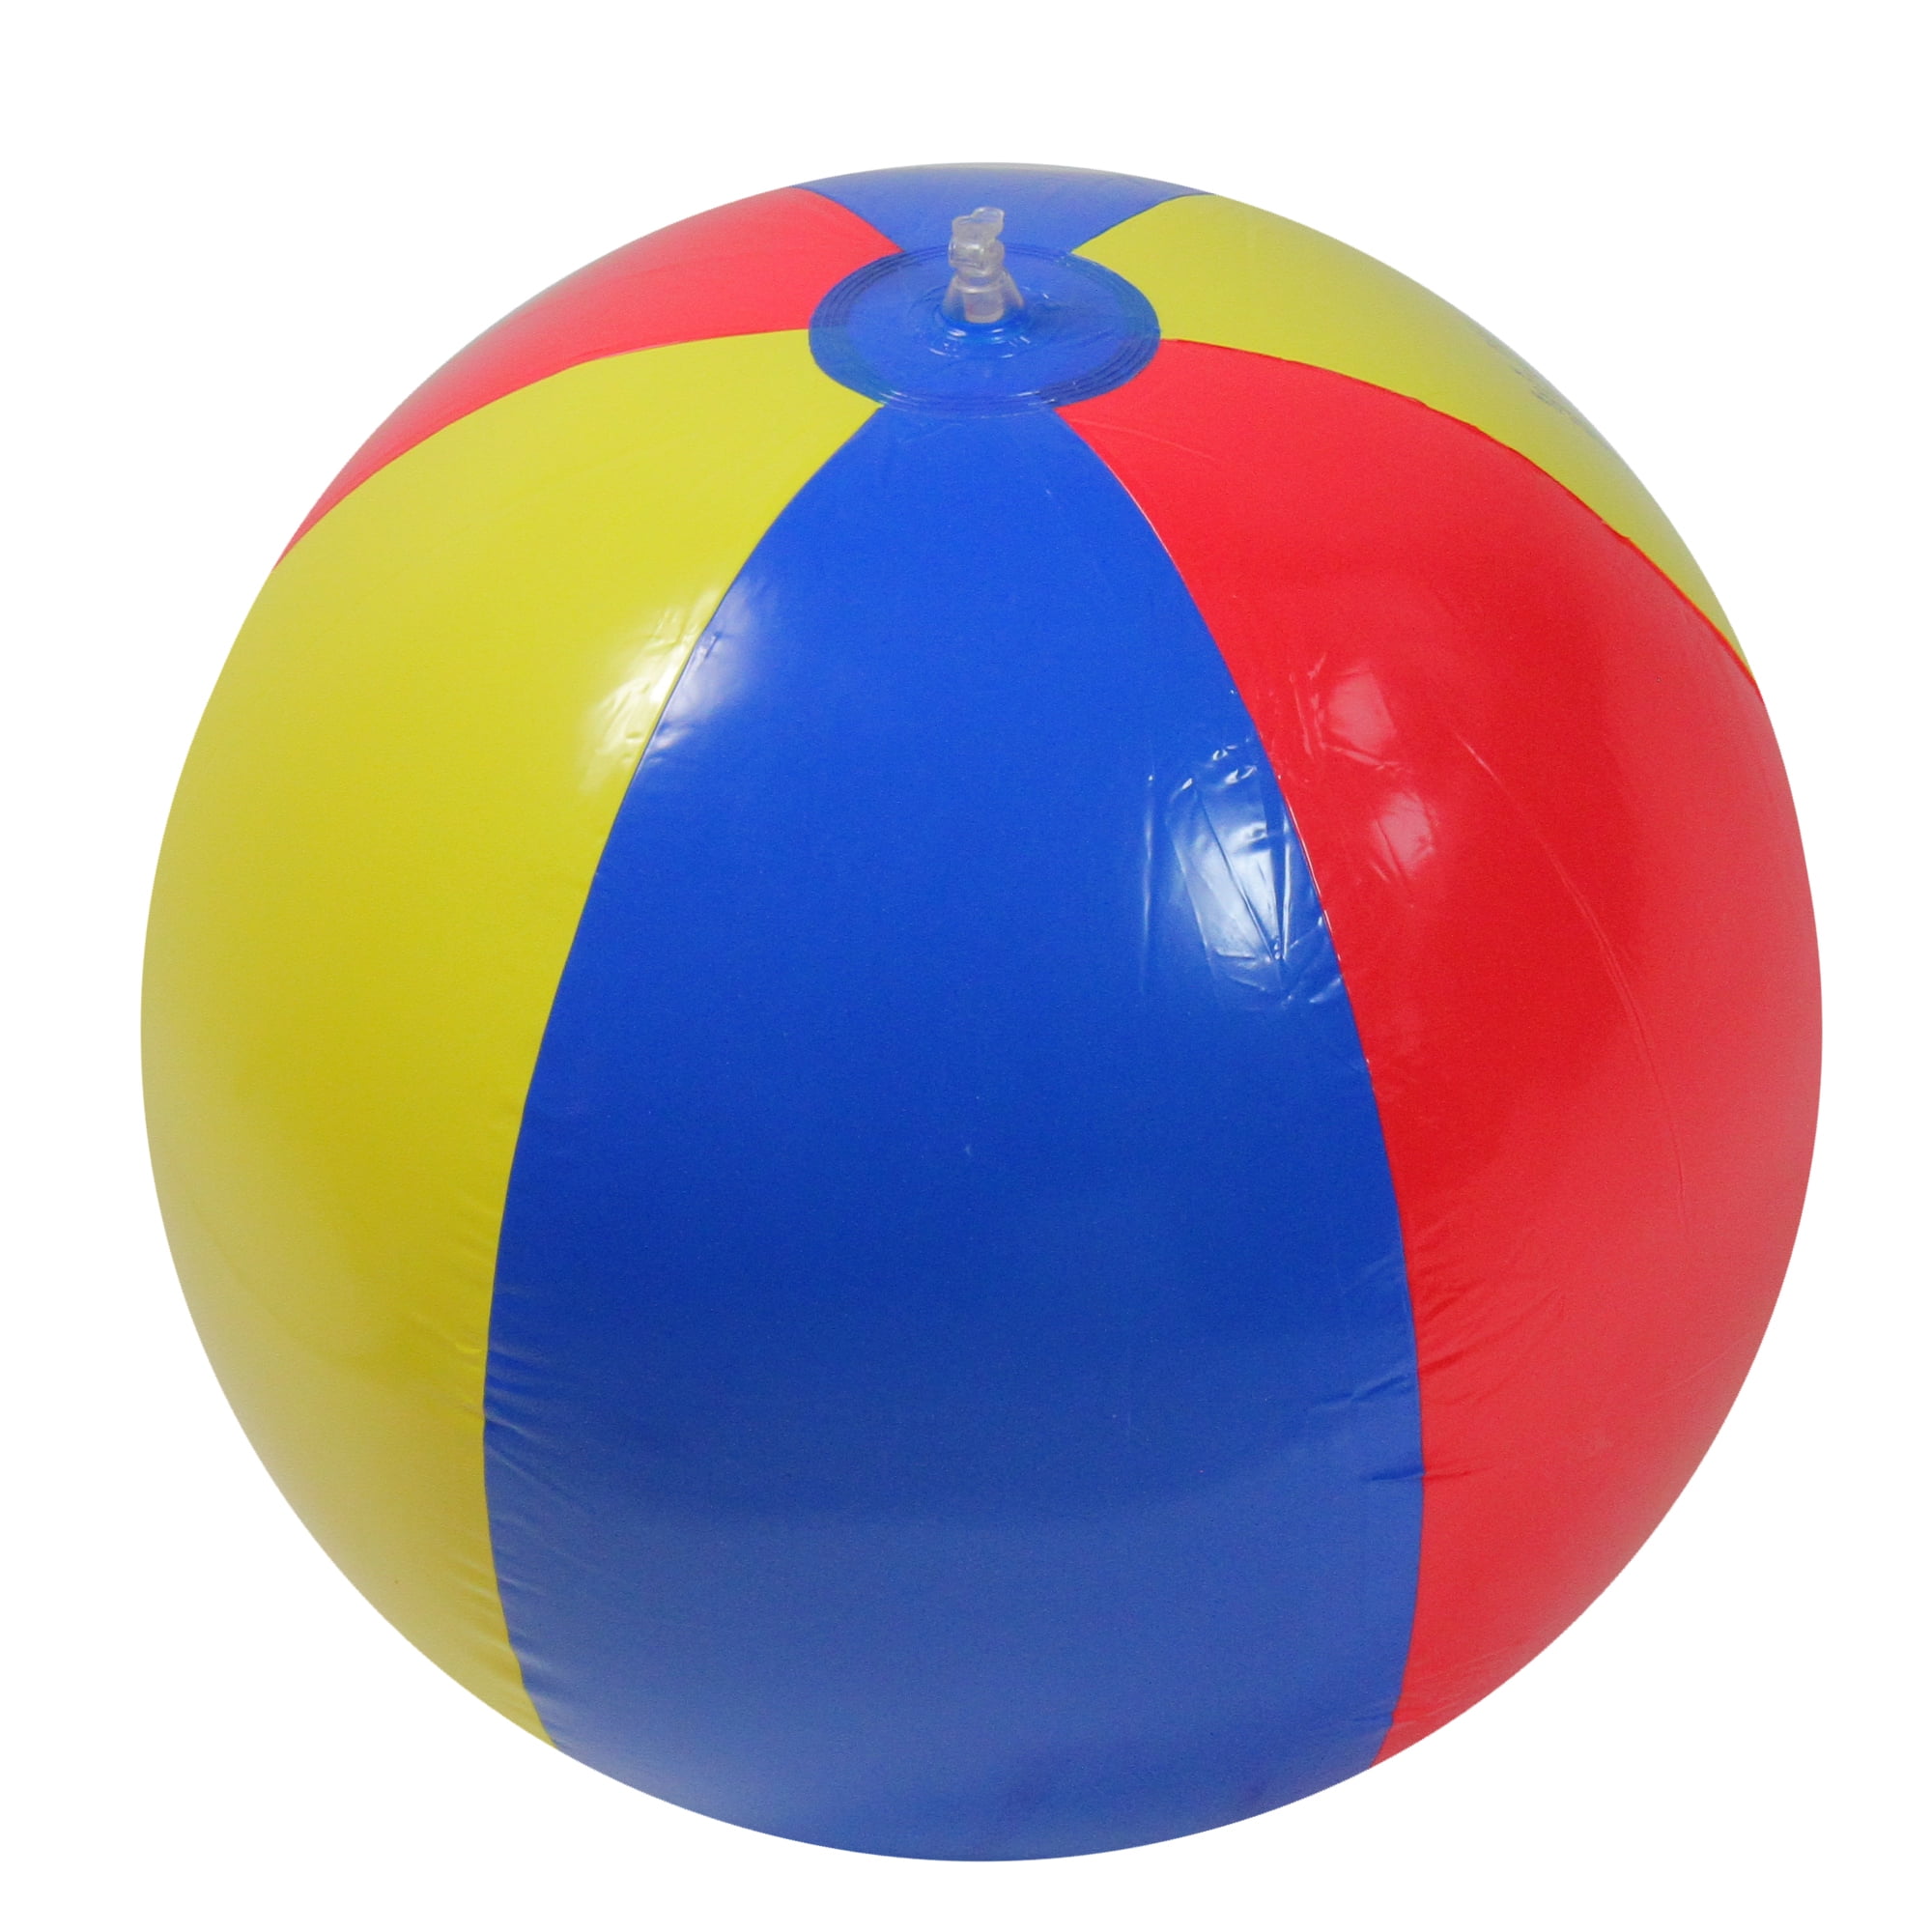 48 NEW MINI BEACH BALLS MULTI COLORED 5" INFLATABLE POOL BEACHBALL PARTY FAVORS 